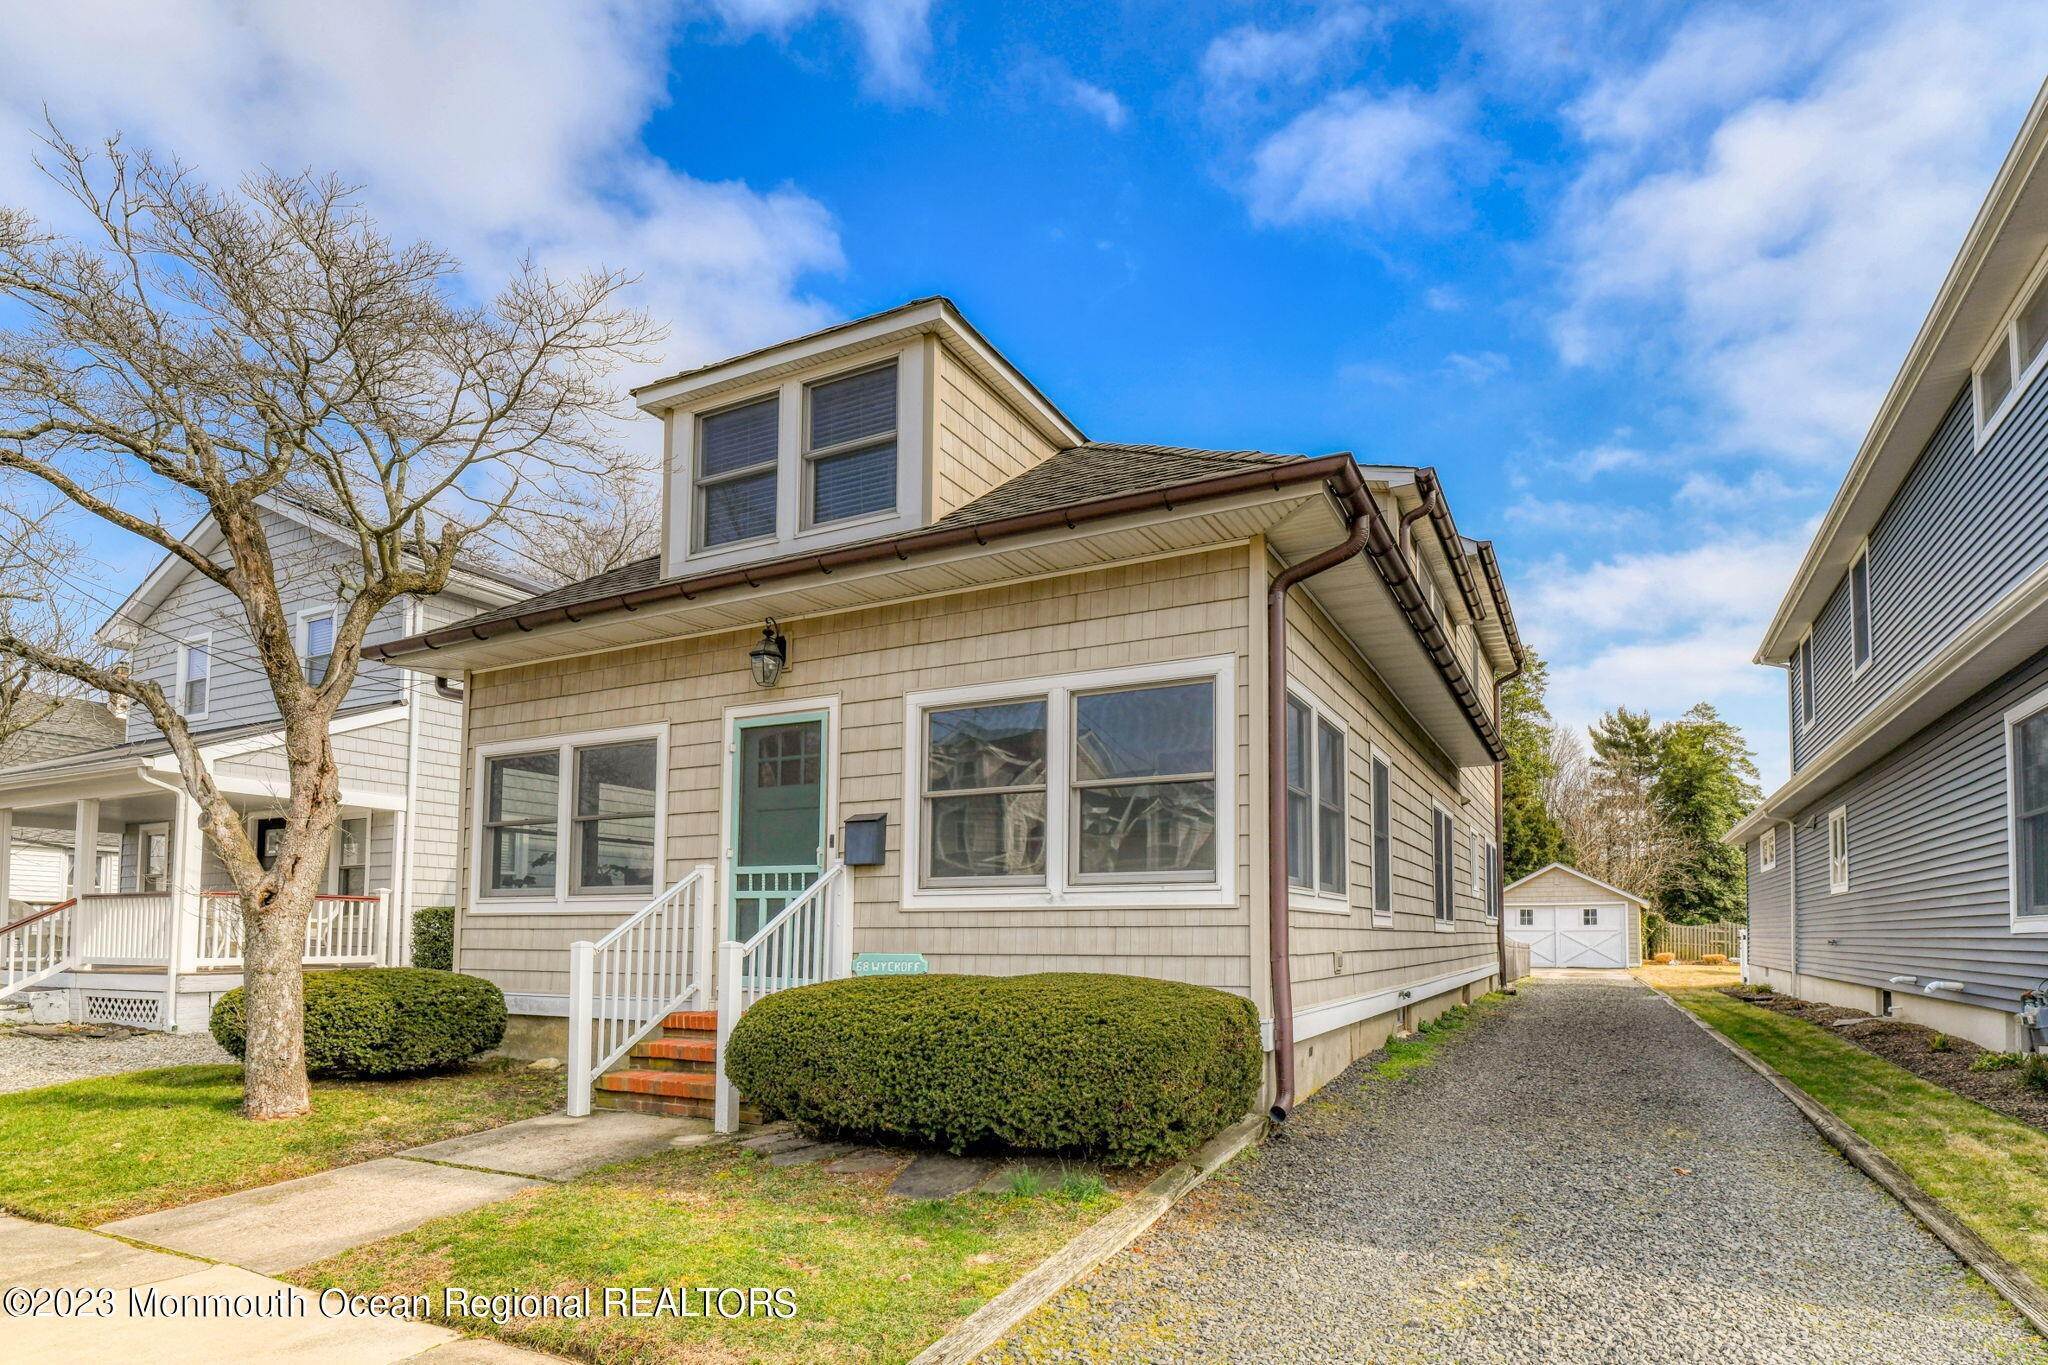 Single Family Homes for Sale at 68 Wyckoff Avenue Manasquan, New Jersey 08736 United States